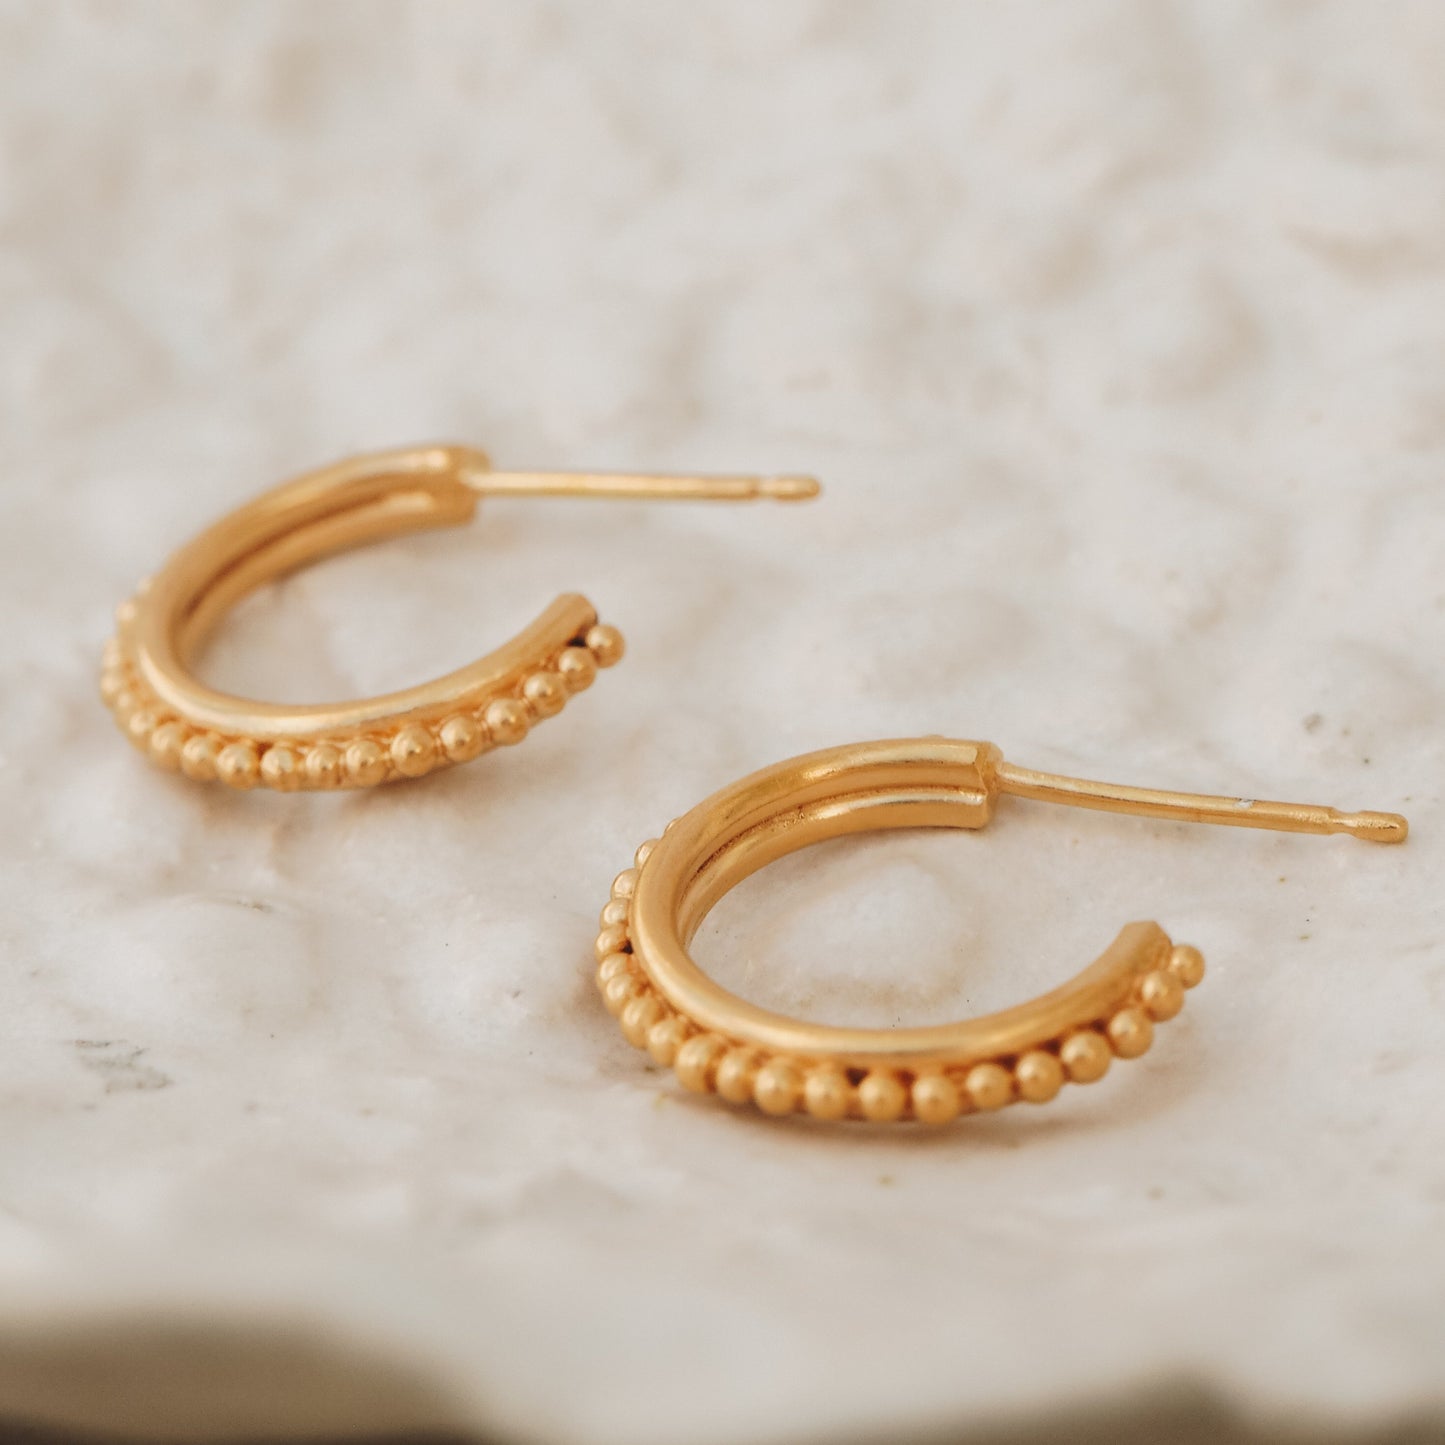 Delicate gold stud hoop earrings with granulation detailing, inspired by ancient jewelry traditions.